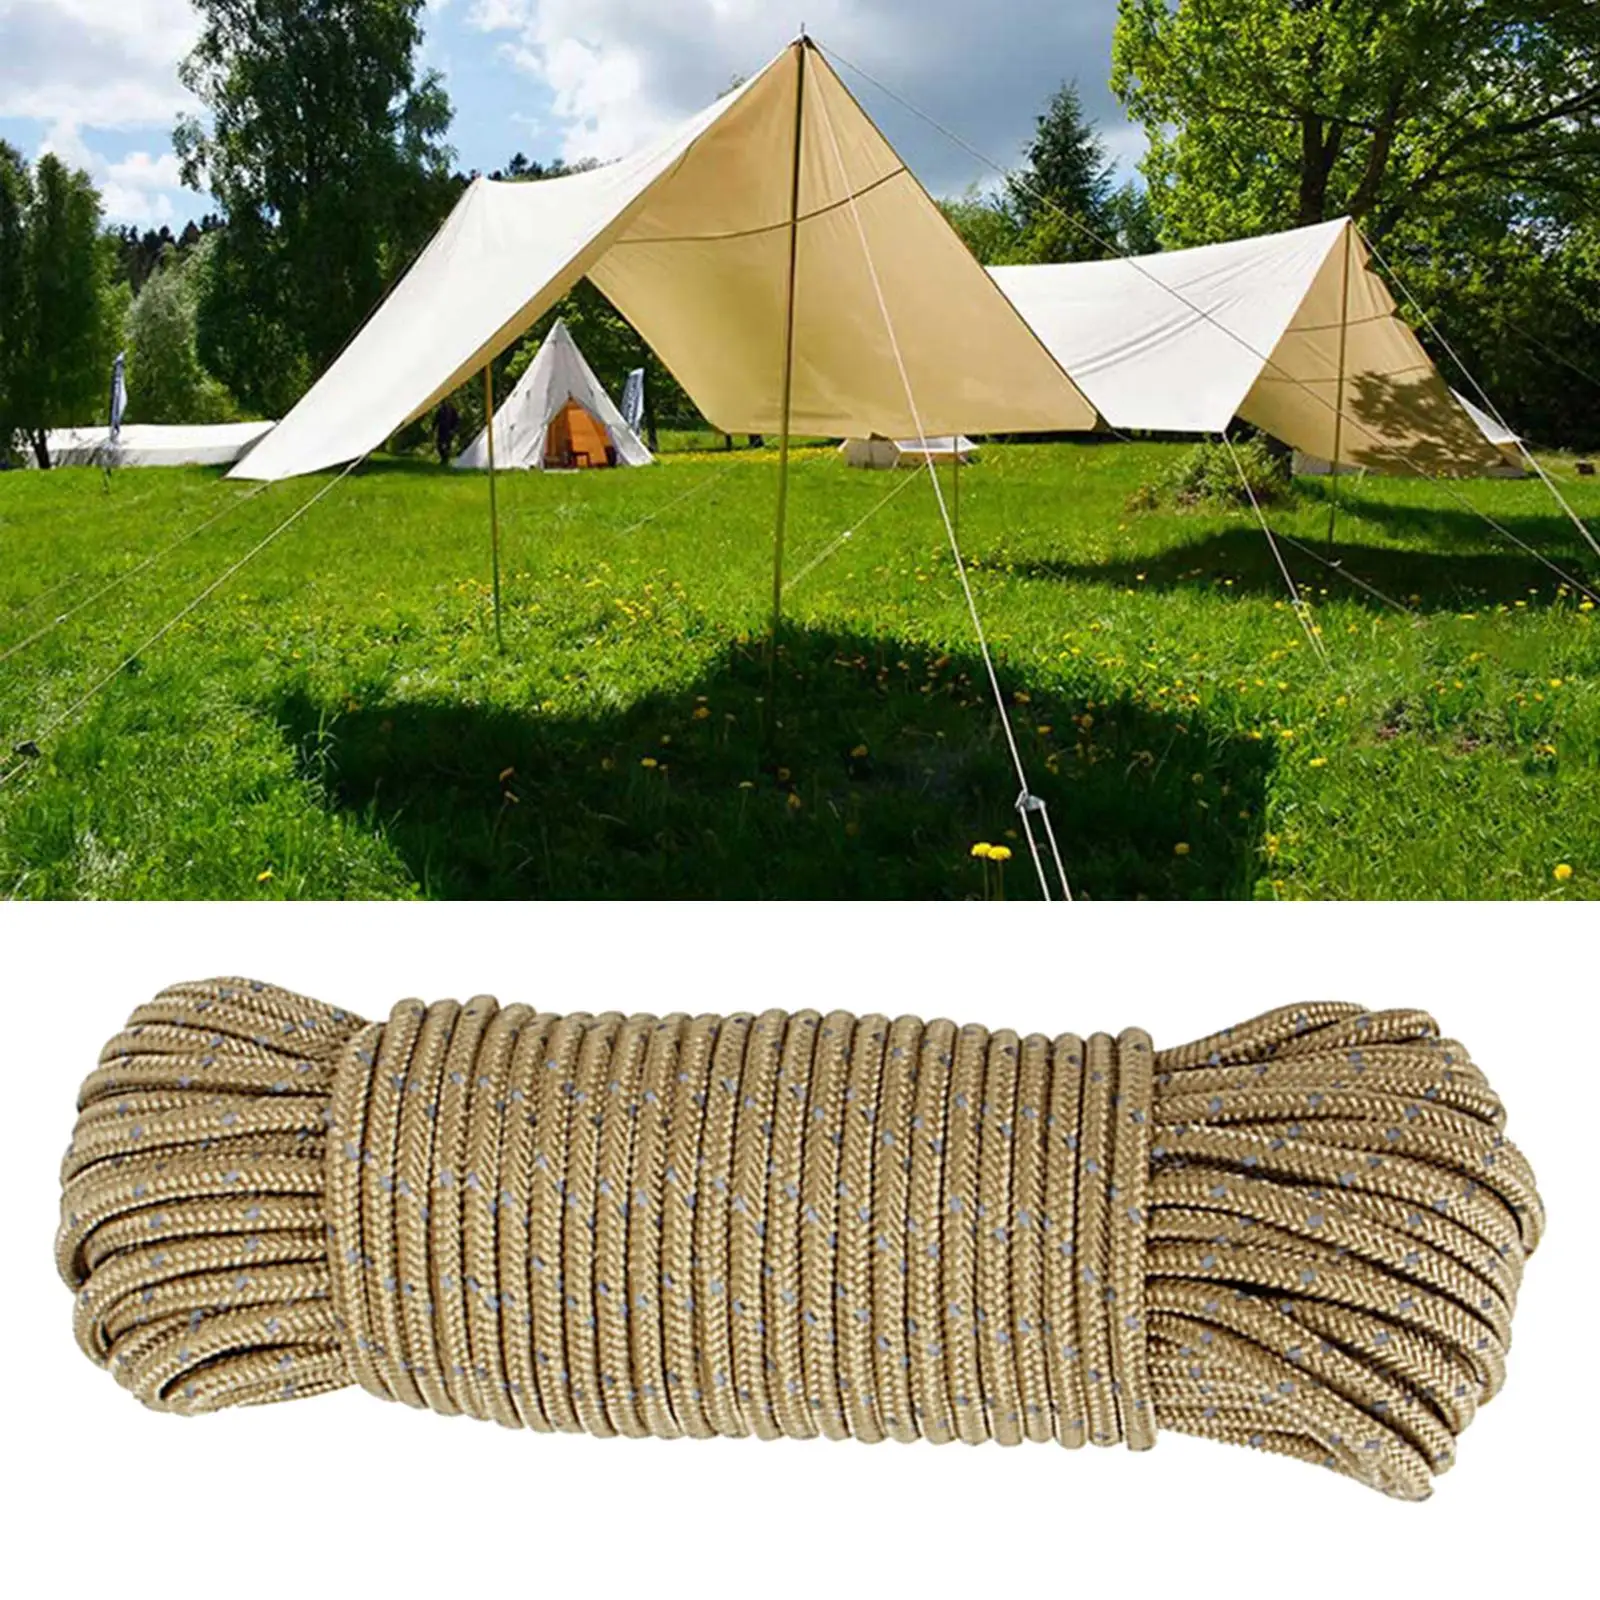 Lightweight Reflective Cord Tent guyline Rope 20M Camping Rope for Backpacking Handle Wraps